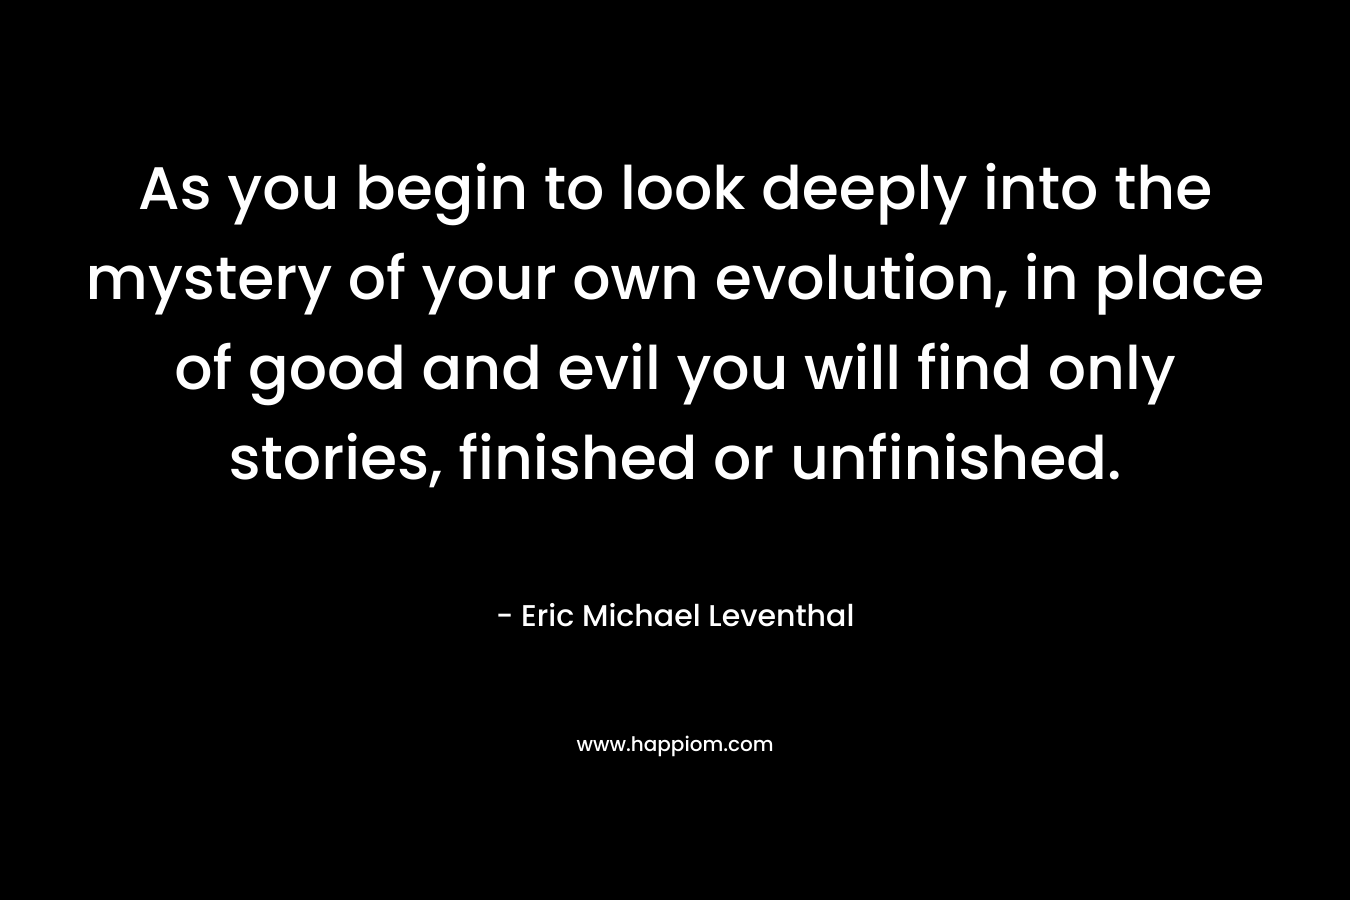 As you begin to look deeply into the mystery of your own evolution, in place of good and evil you will find only stories, finished or unfinished.